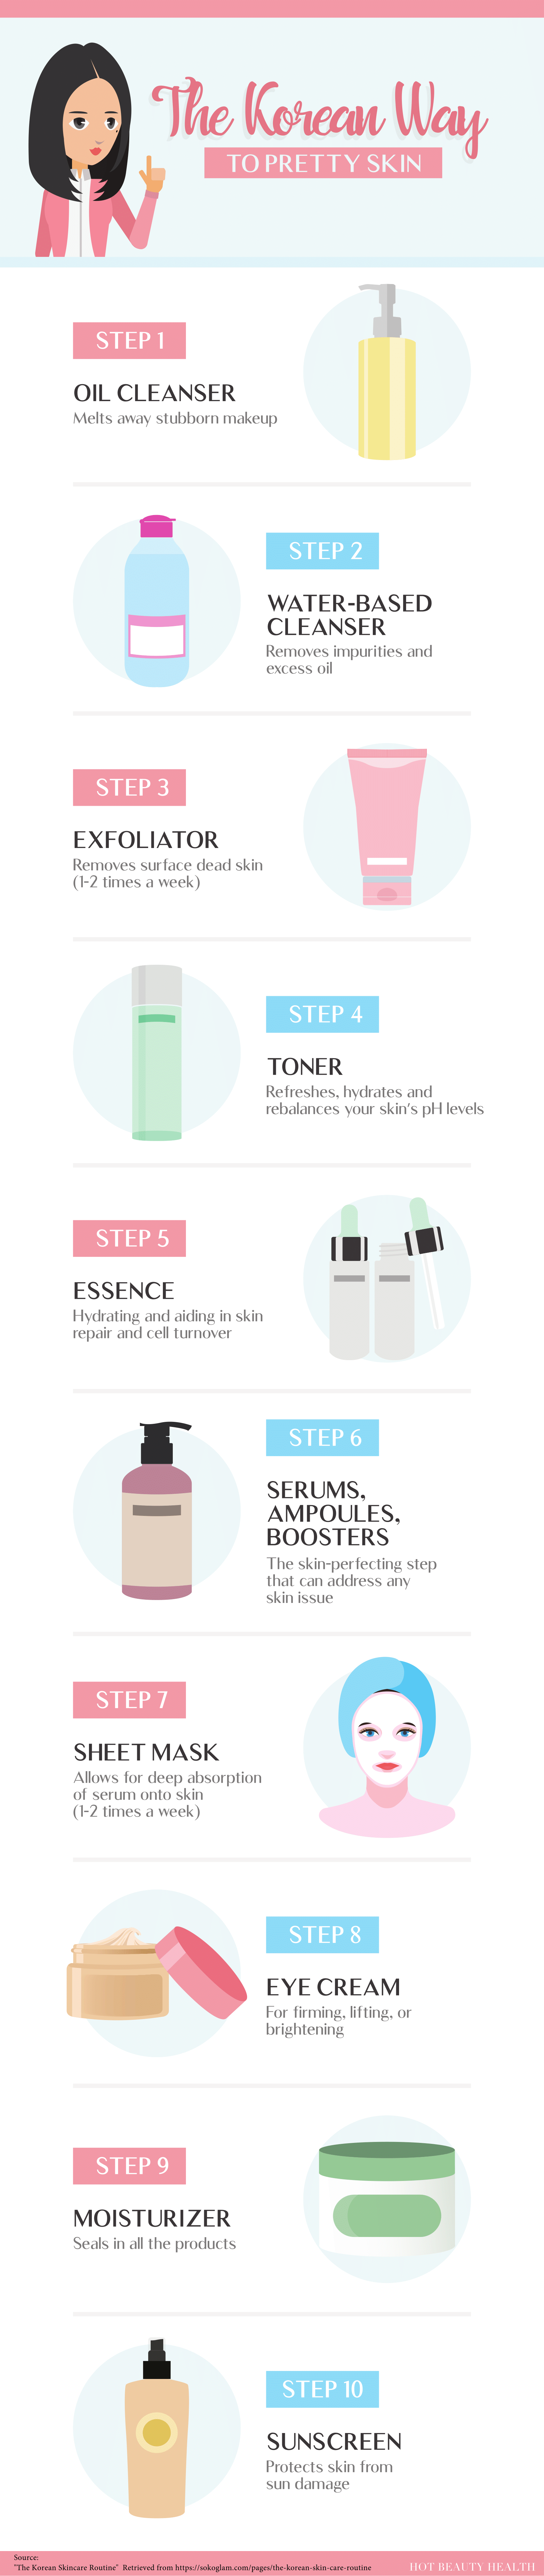 The ever so popular 10-step Korean skincare routine is easier than ever to do with this value set curated for your skin type from Soko Glam. Find what's right for your skin type here!